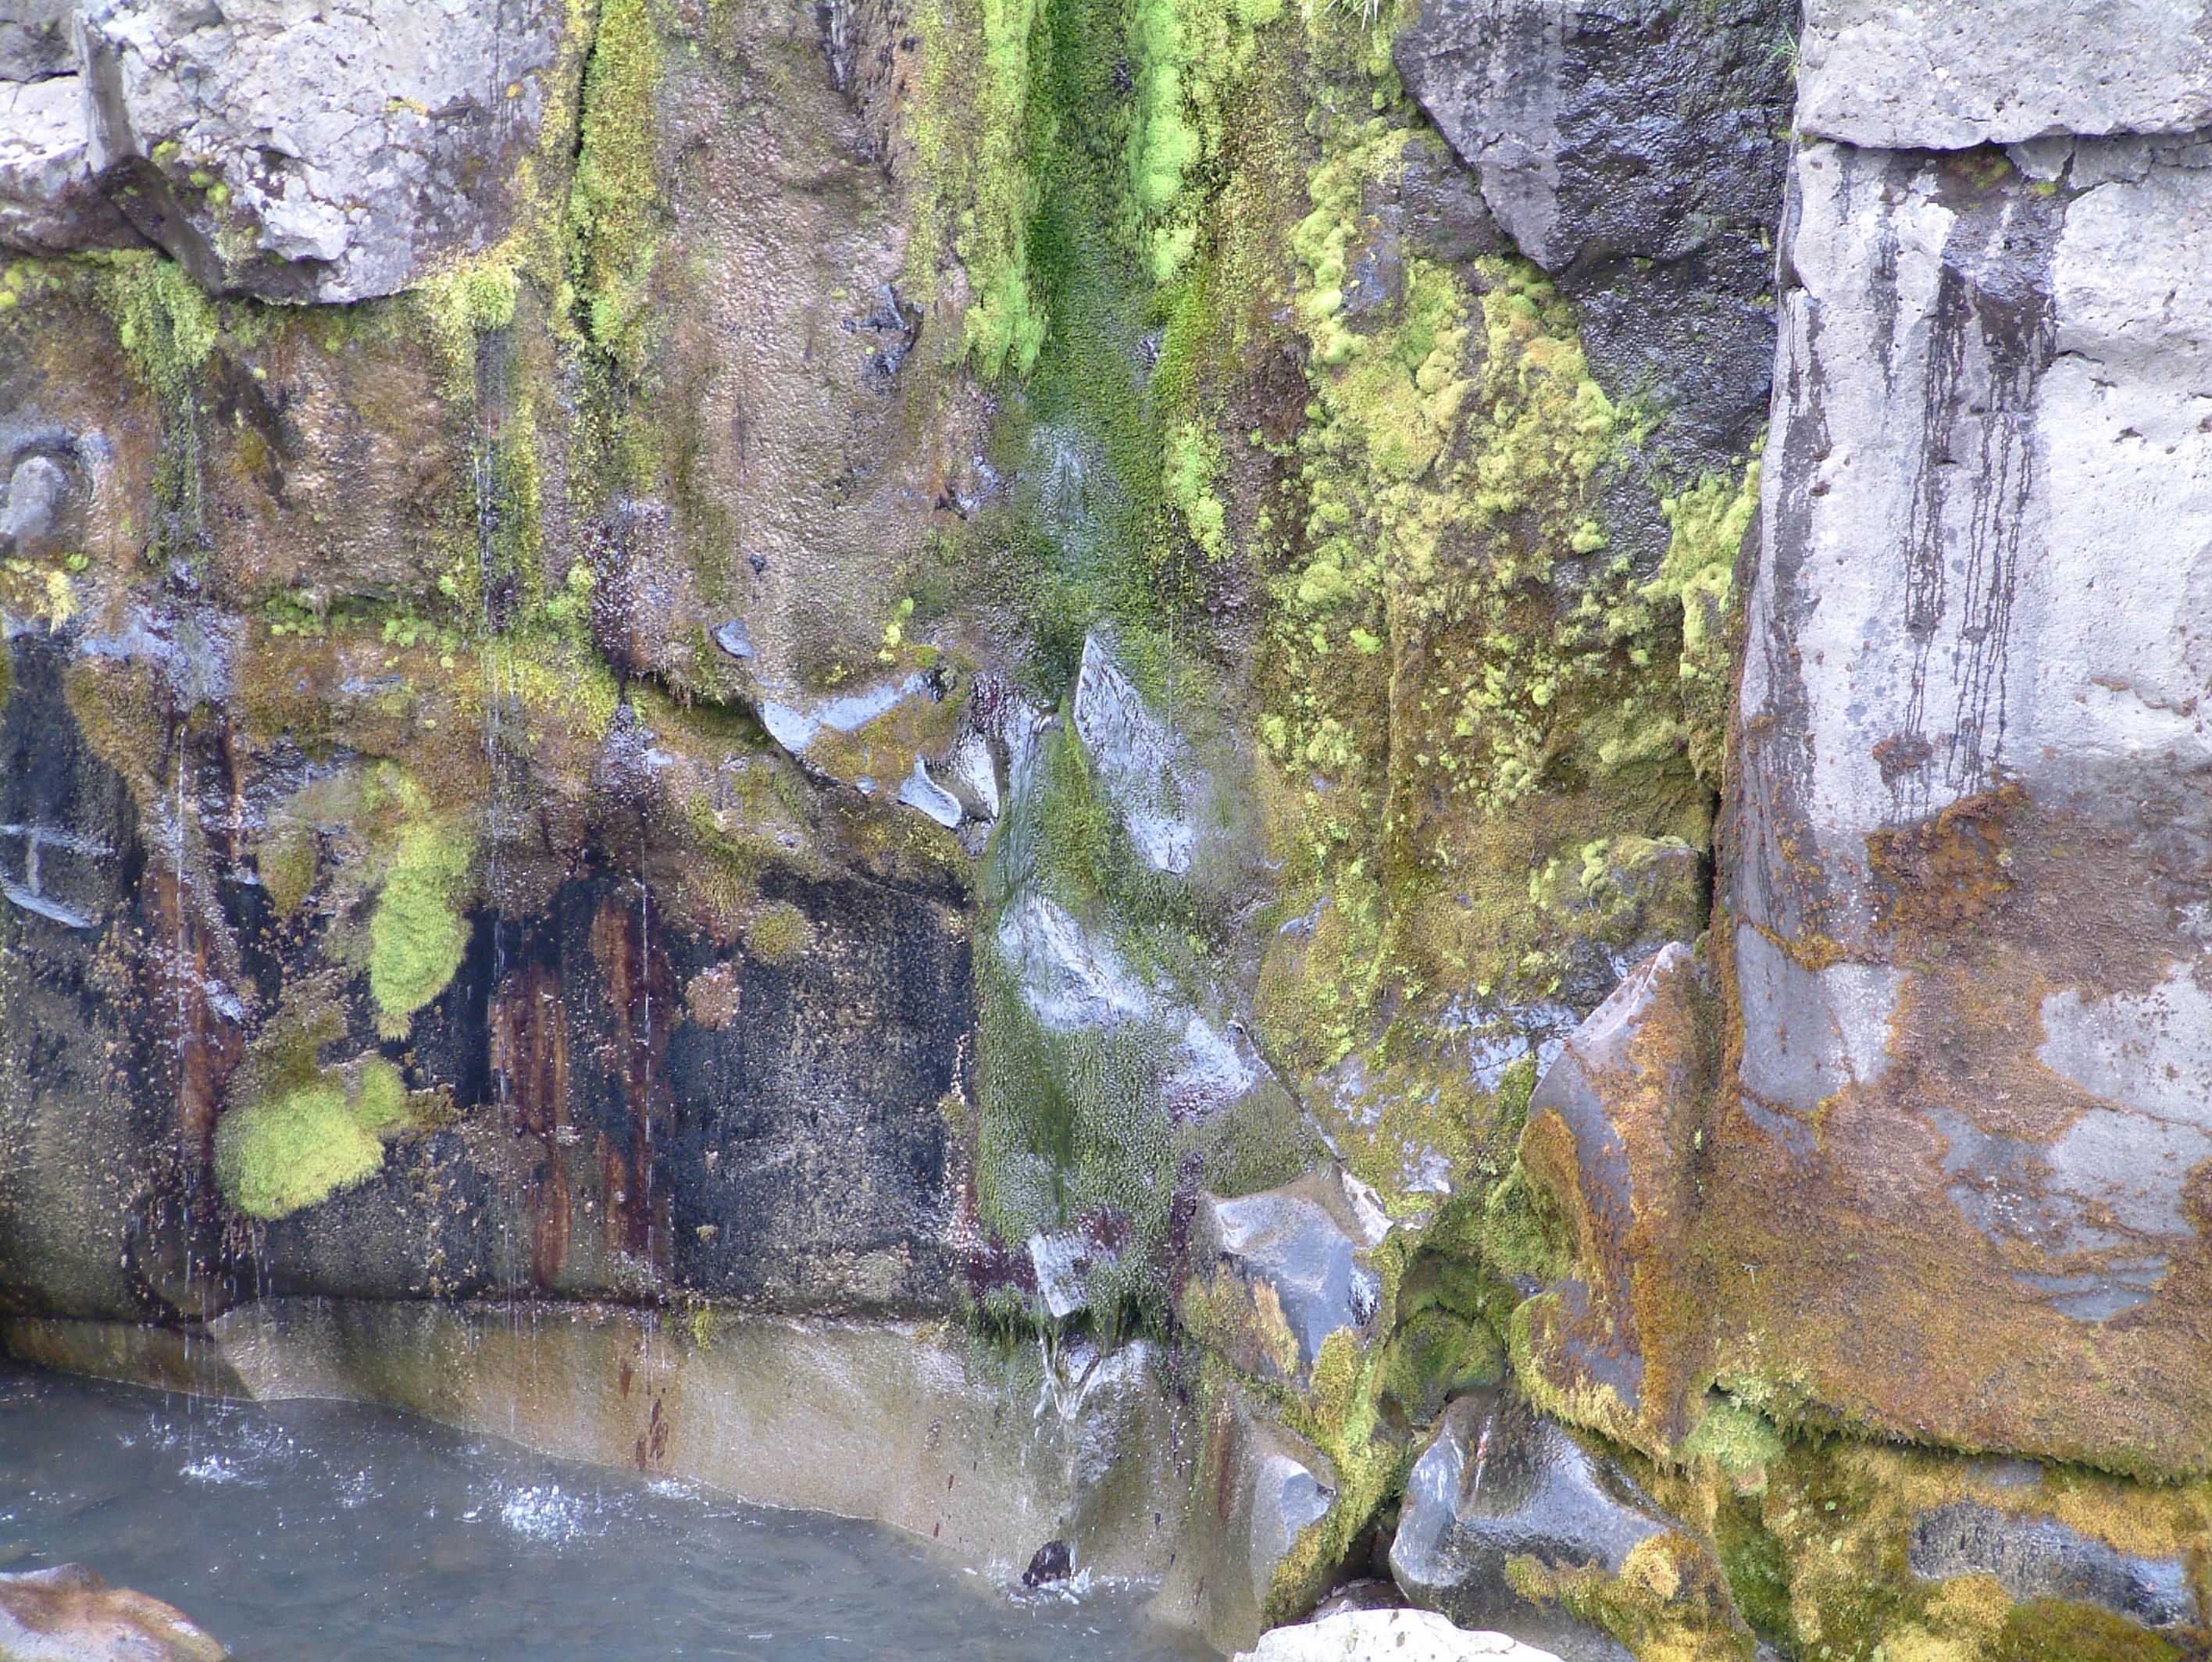 Moss growing on the face of the rocks because of the water leaking through it